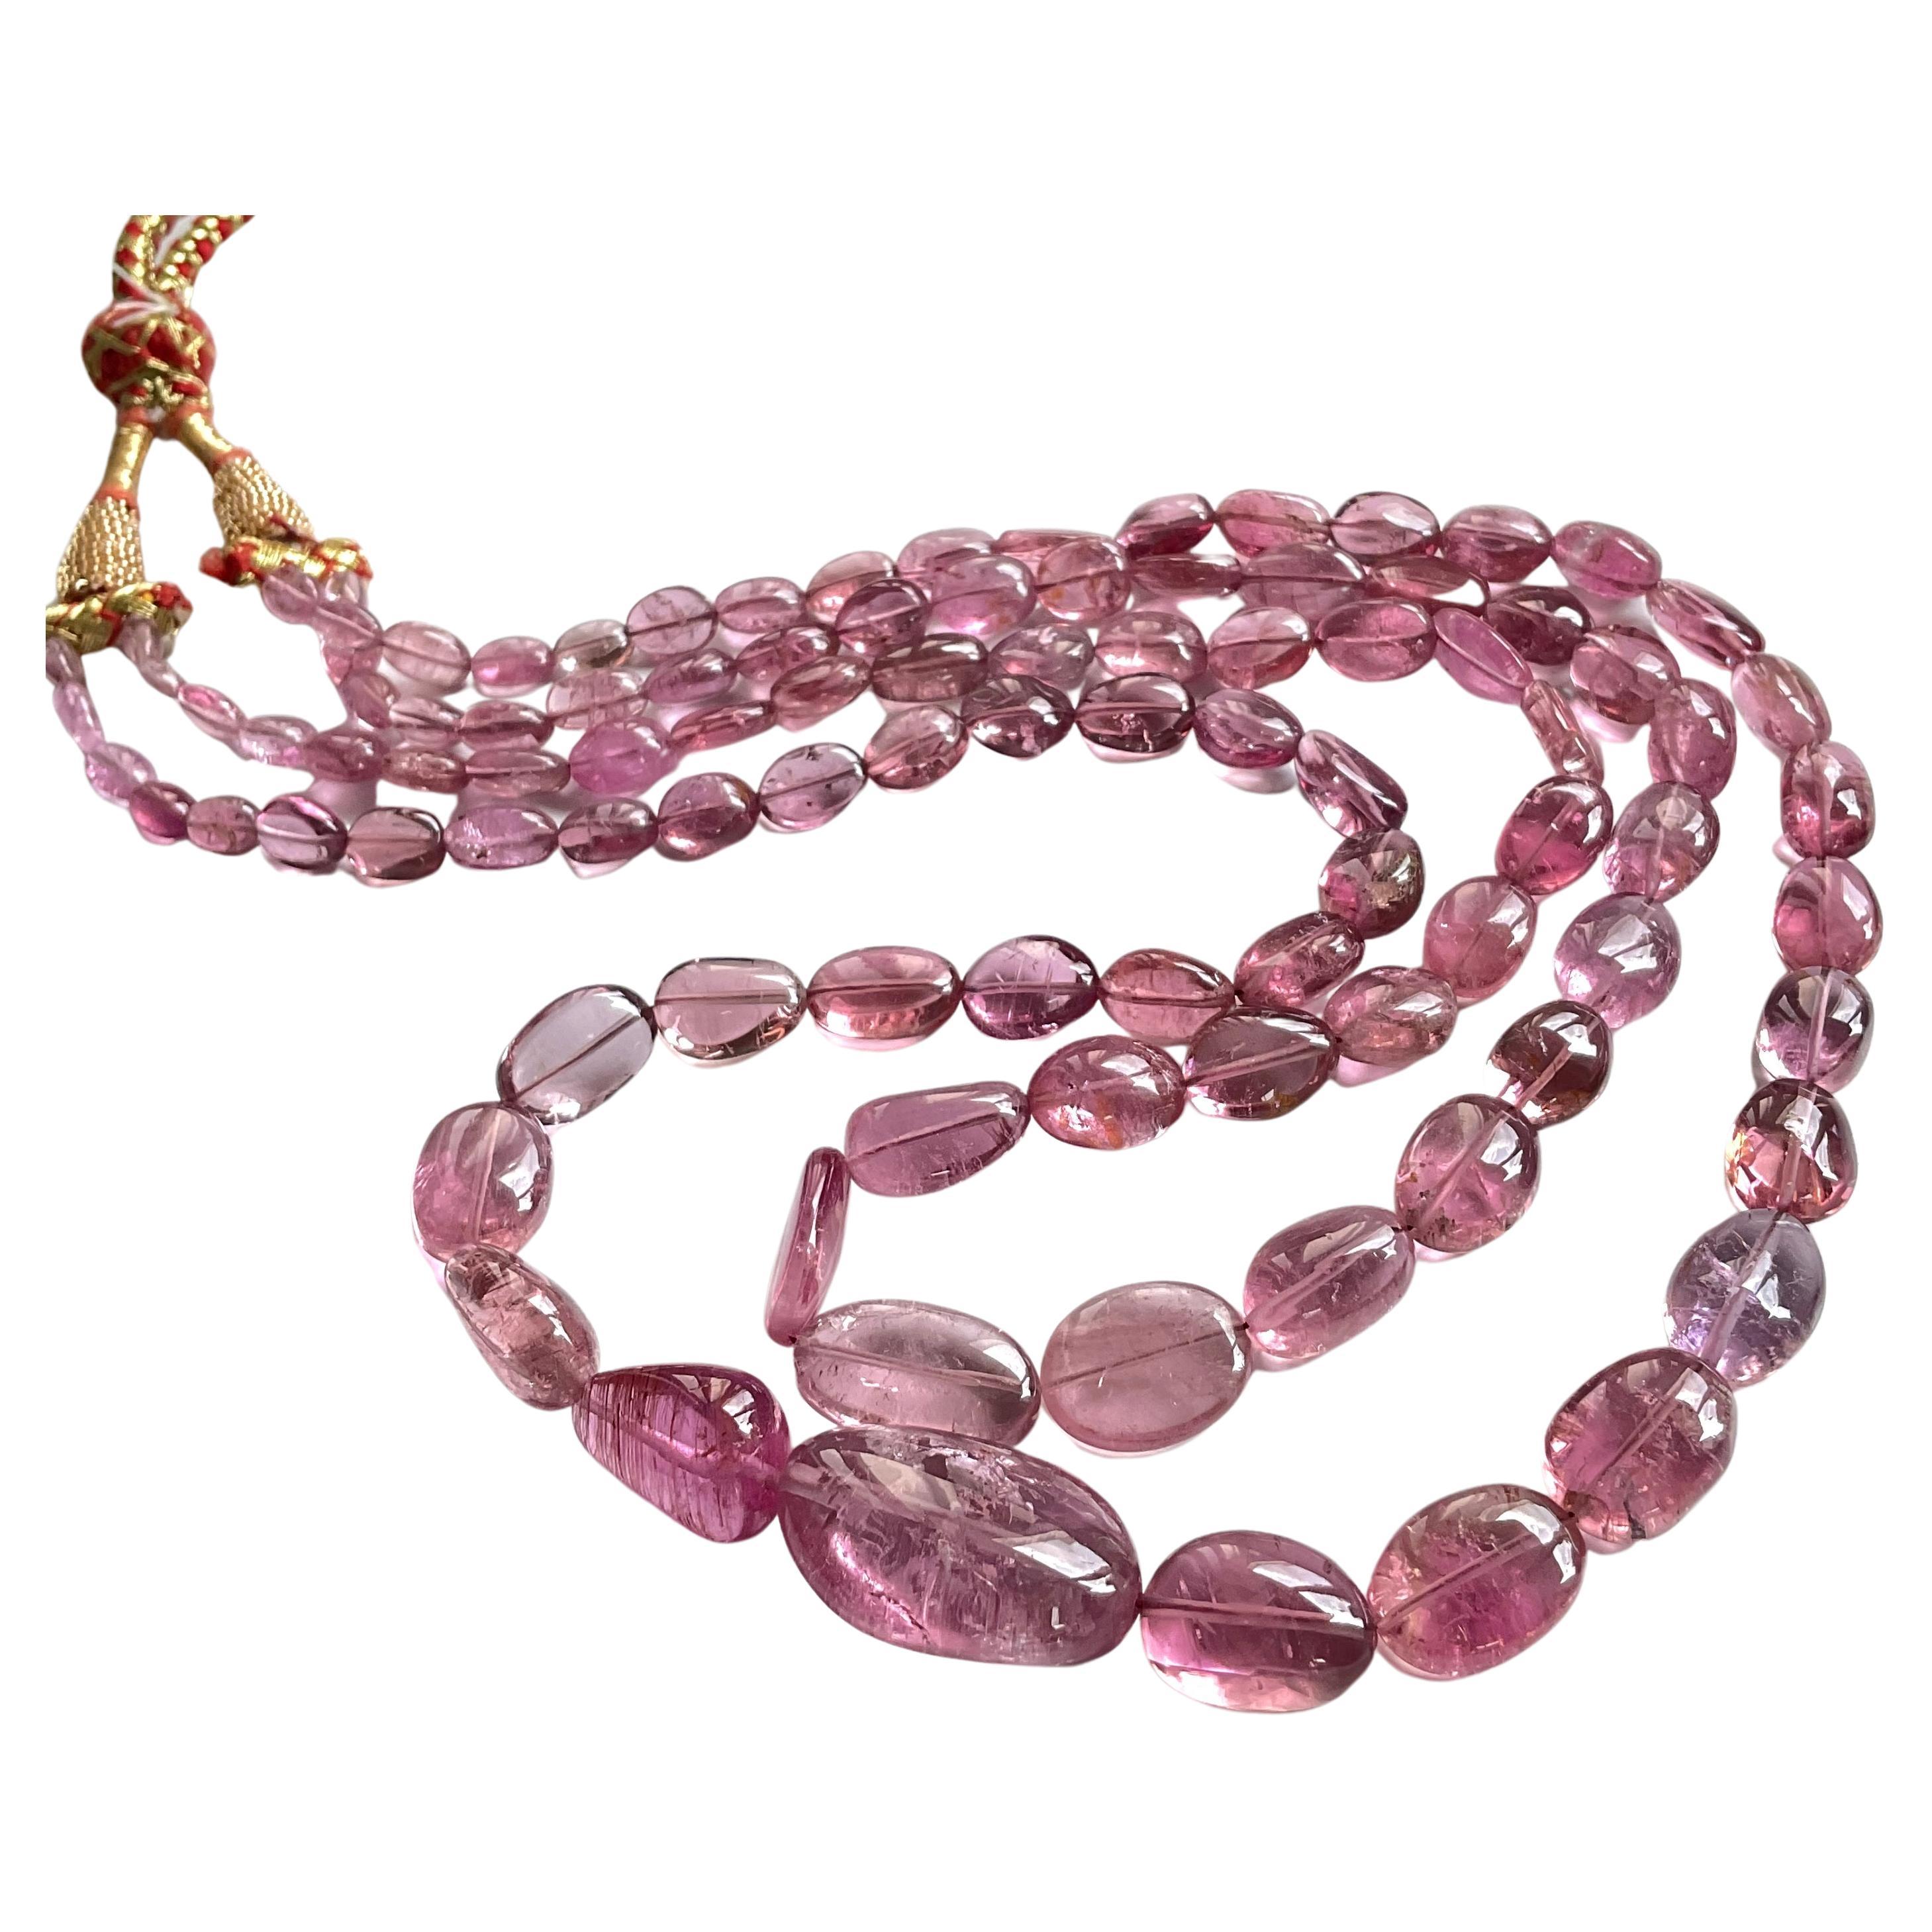 296.70 Carats Pink Tourmaline Plain Tumbled necklace Jewelry Natural Gemstones For Sale